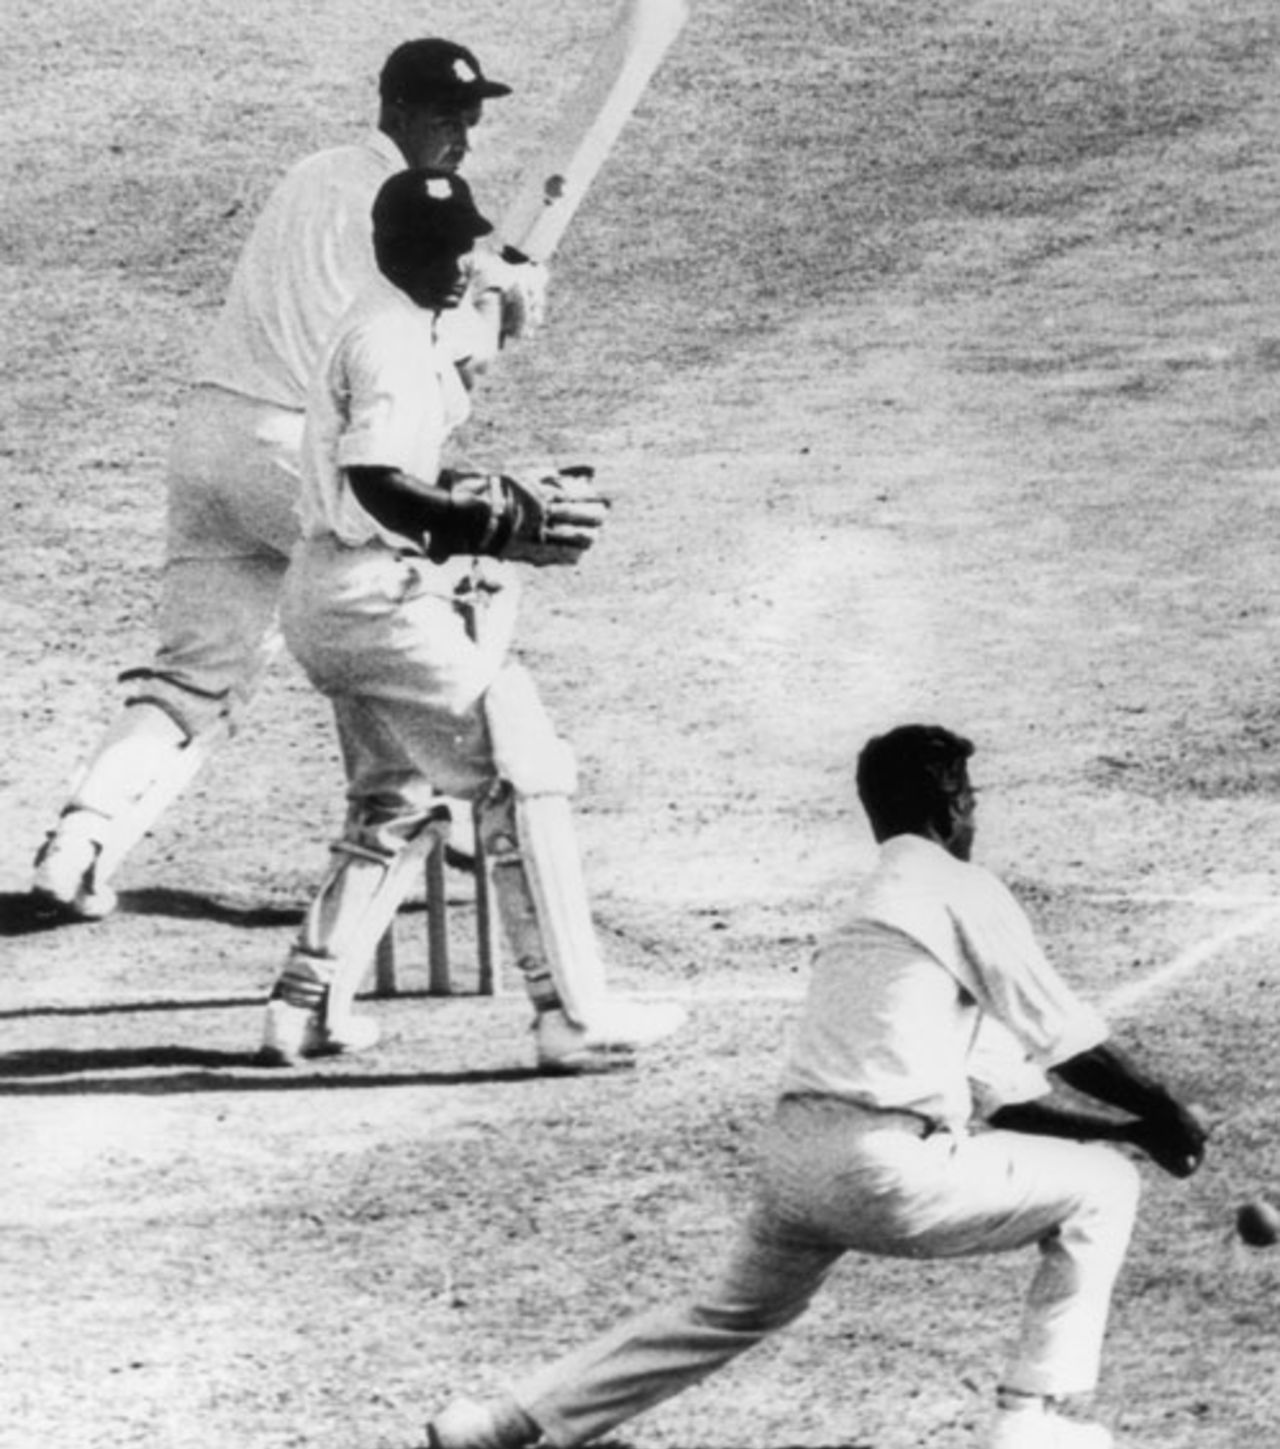 Rohan Kanhai drops Pat Pocock, West Indies v England, 5th Test, Georgetown, 5th day, April 3, 1968